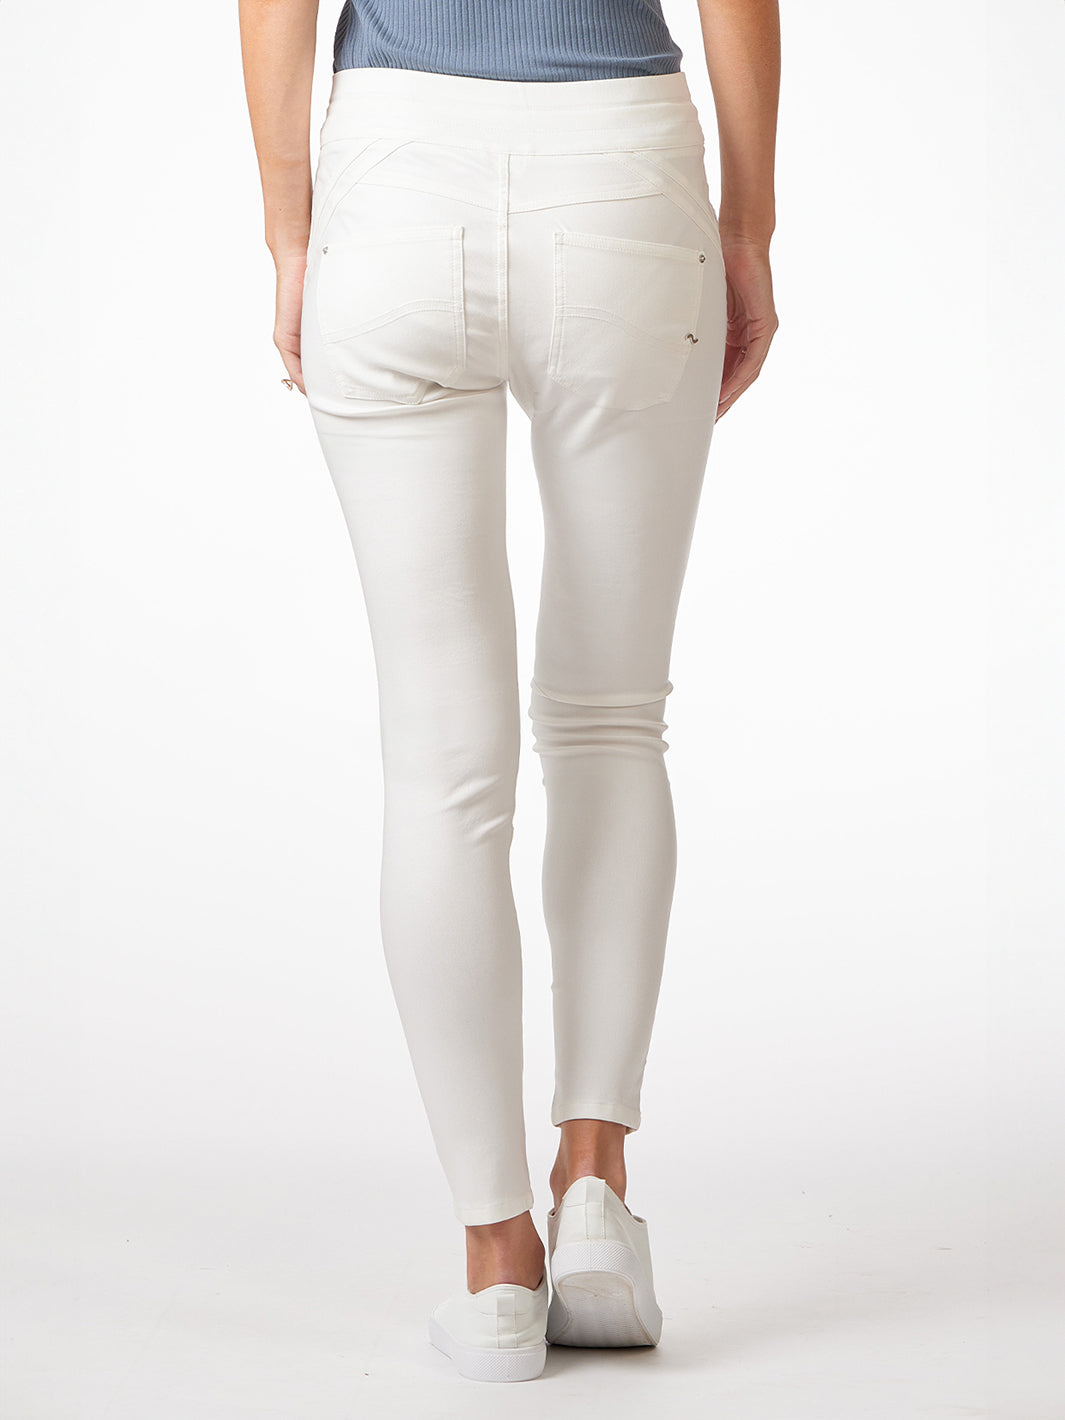 Silverbell Pant